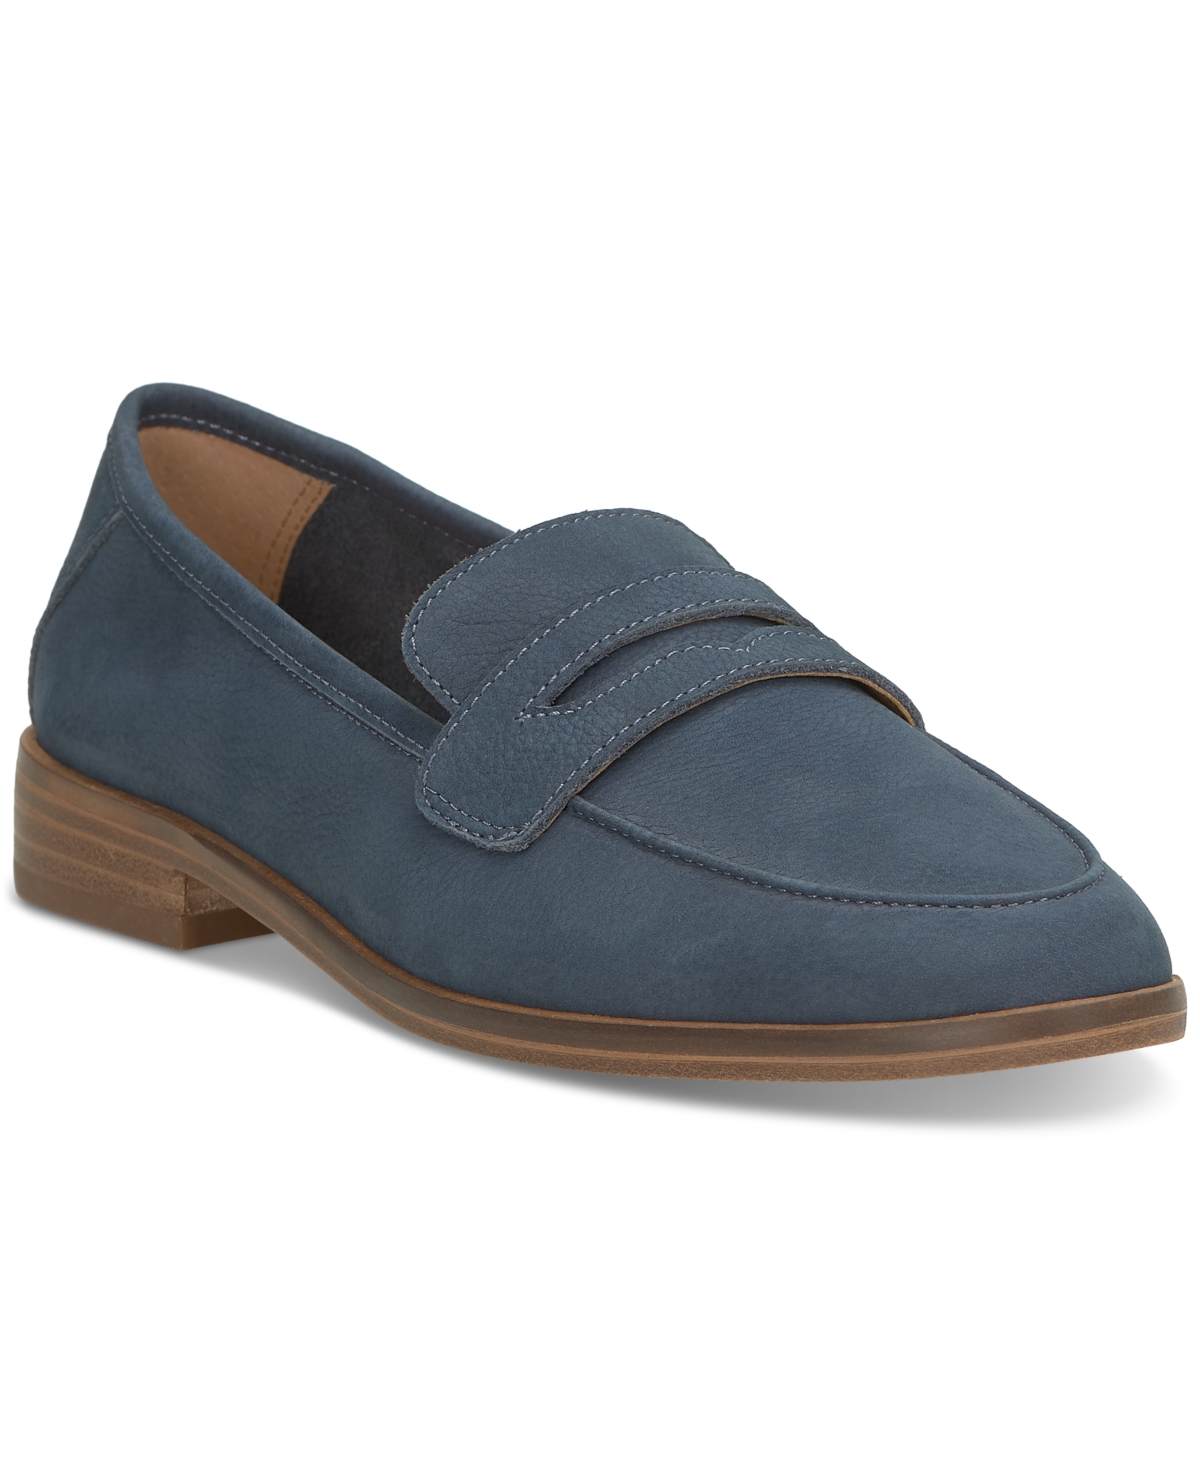 LUCKY BRAND WOMEN'S PARMIN FLAT PENNY LOAFERS